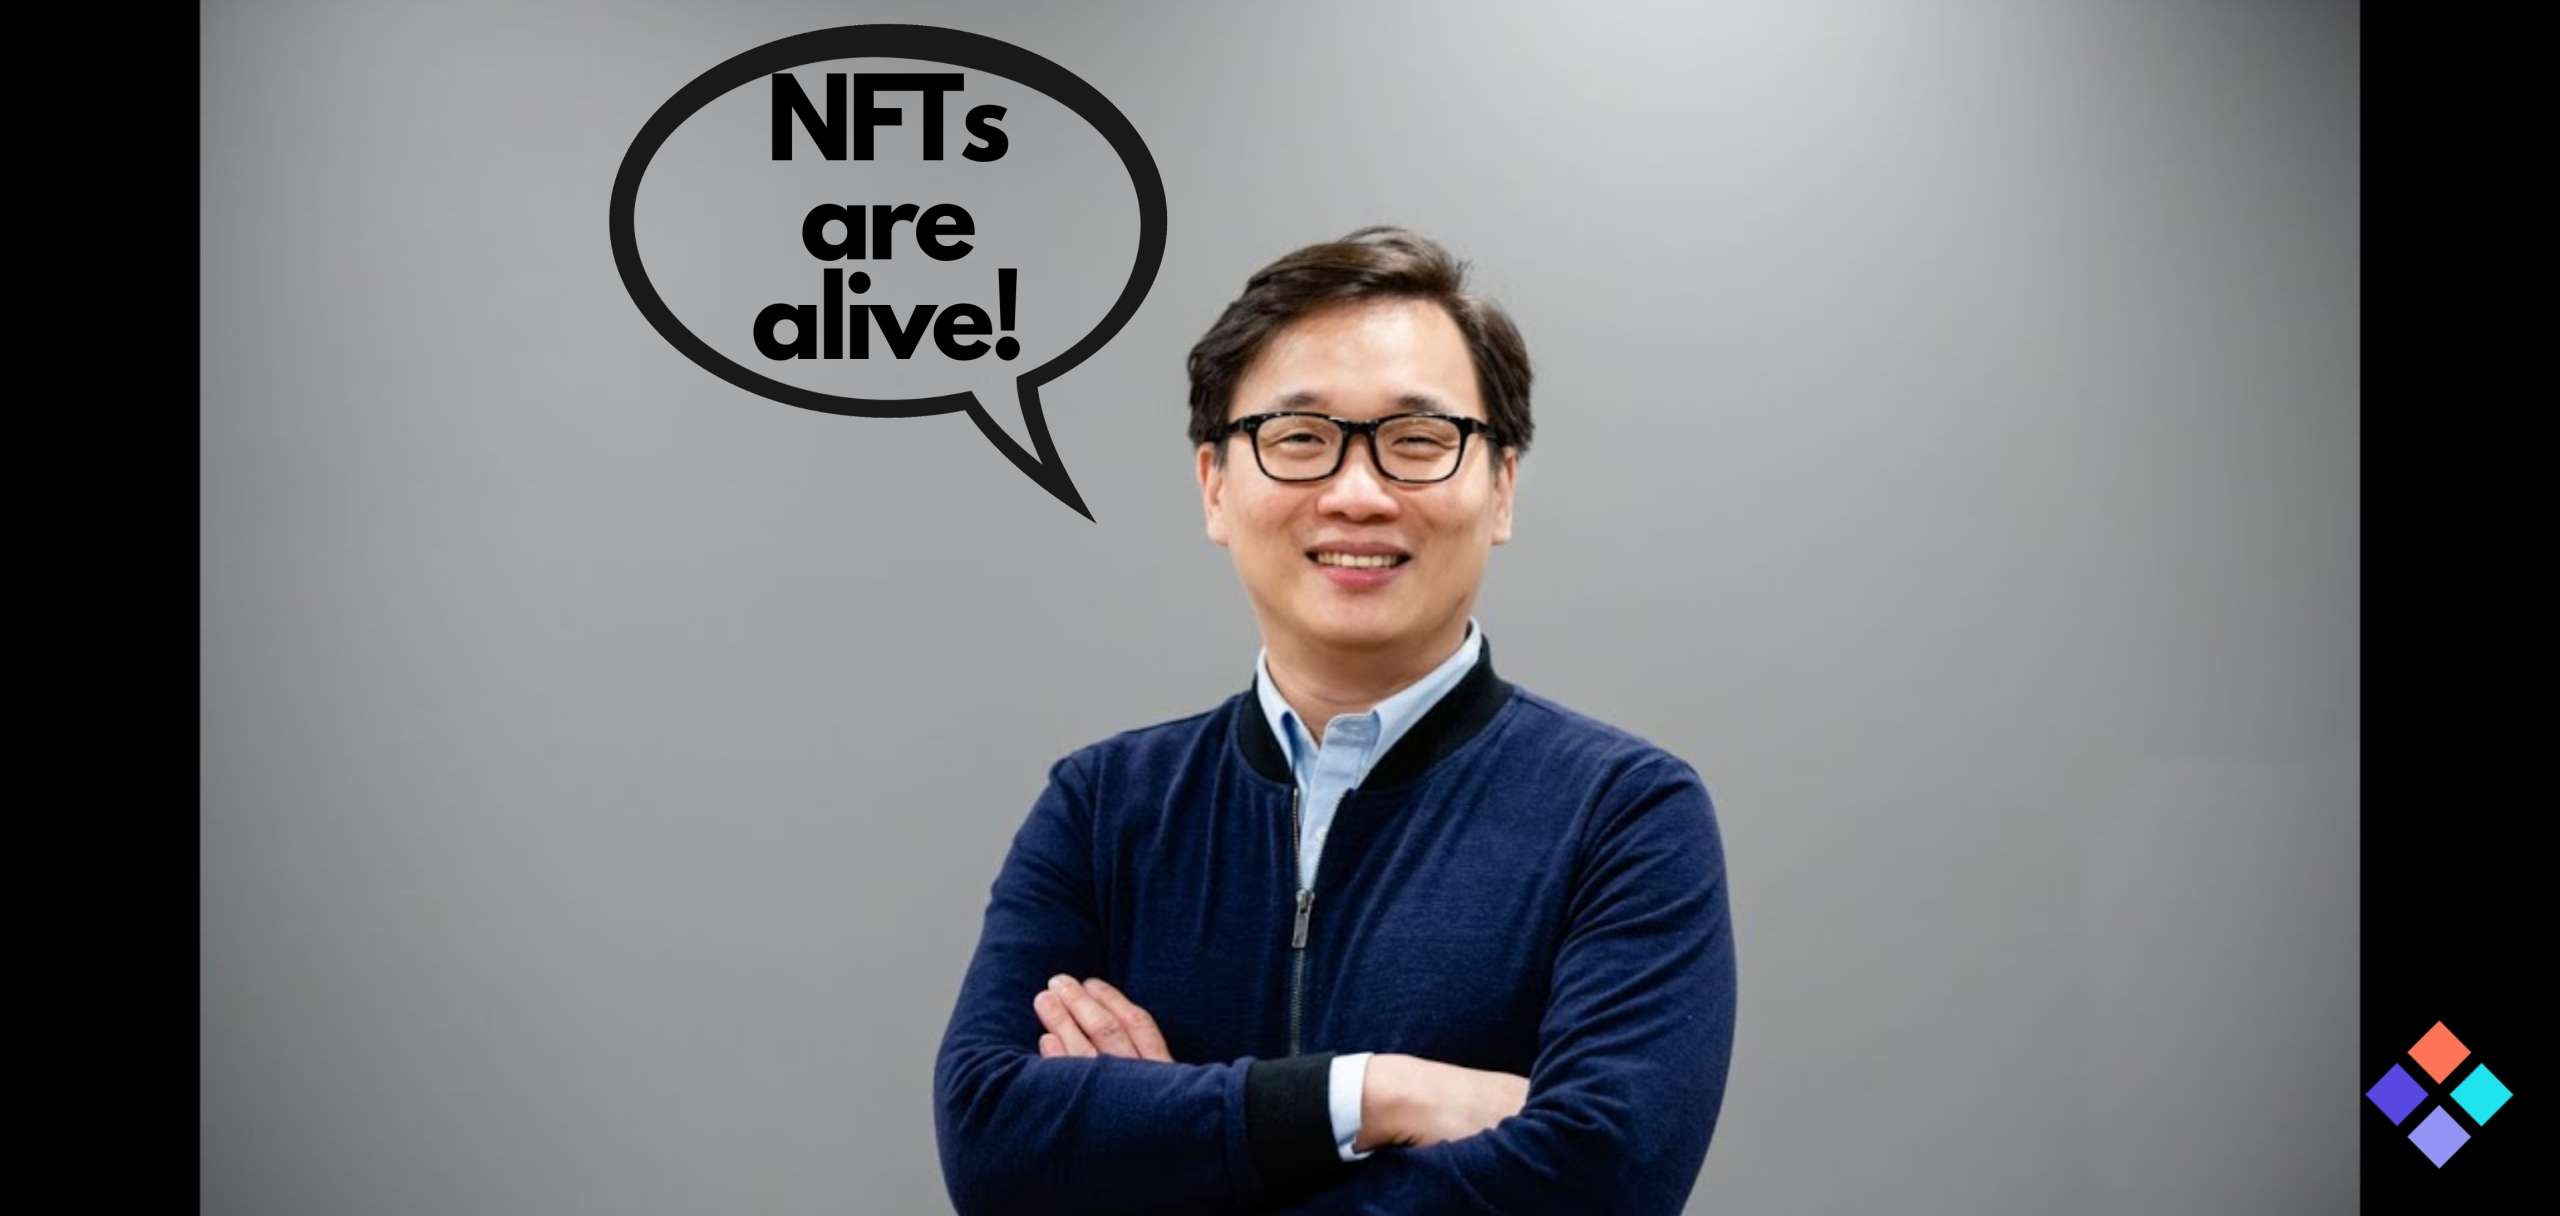 ByBit's Head of Partnerships Asserts NFTs are Alive and Kicking